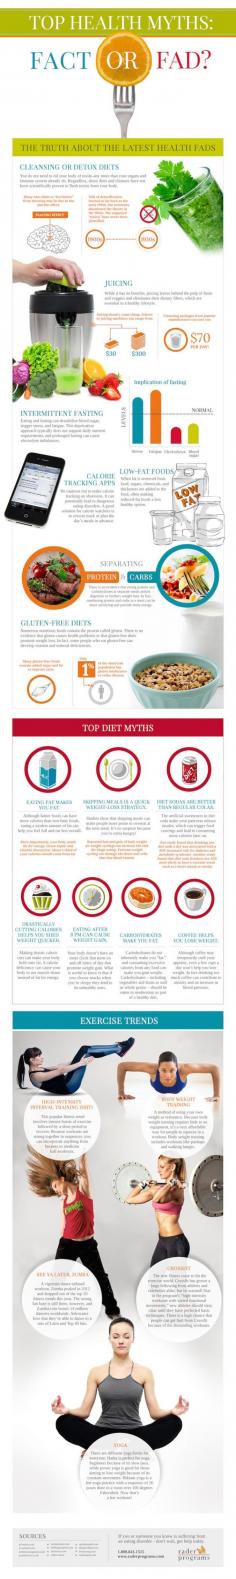 Infographic on Fad Diets